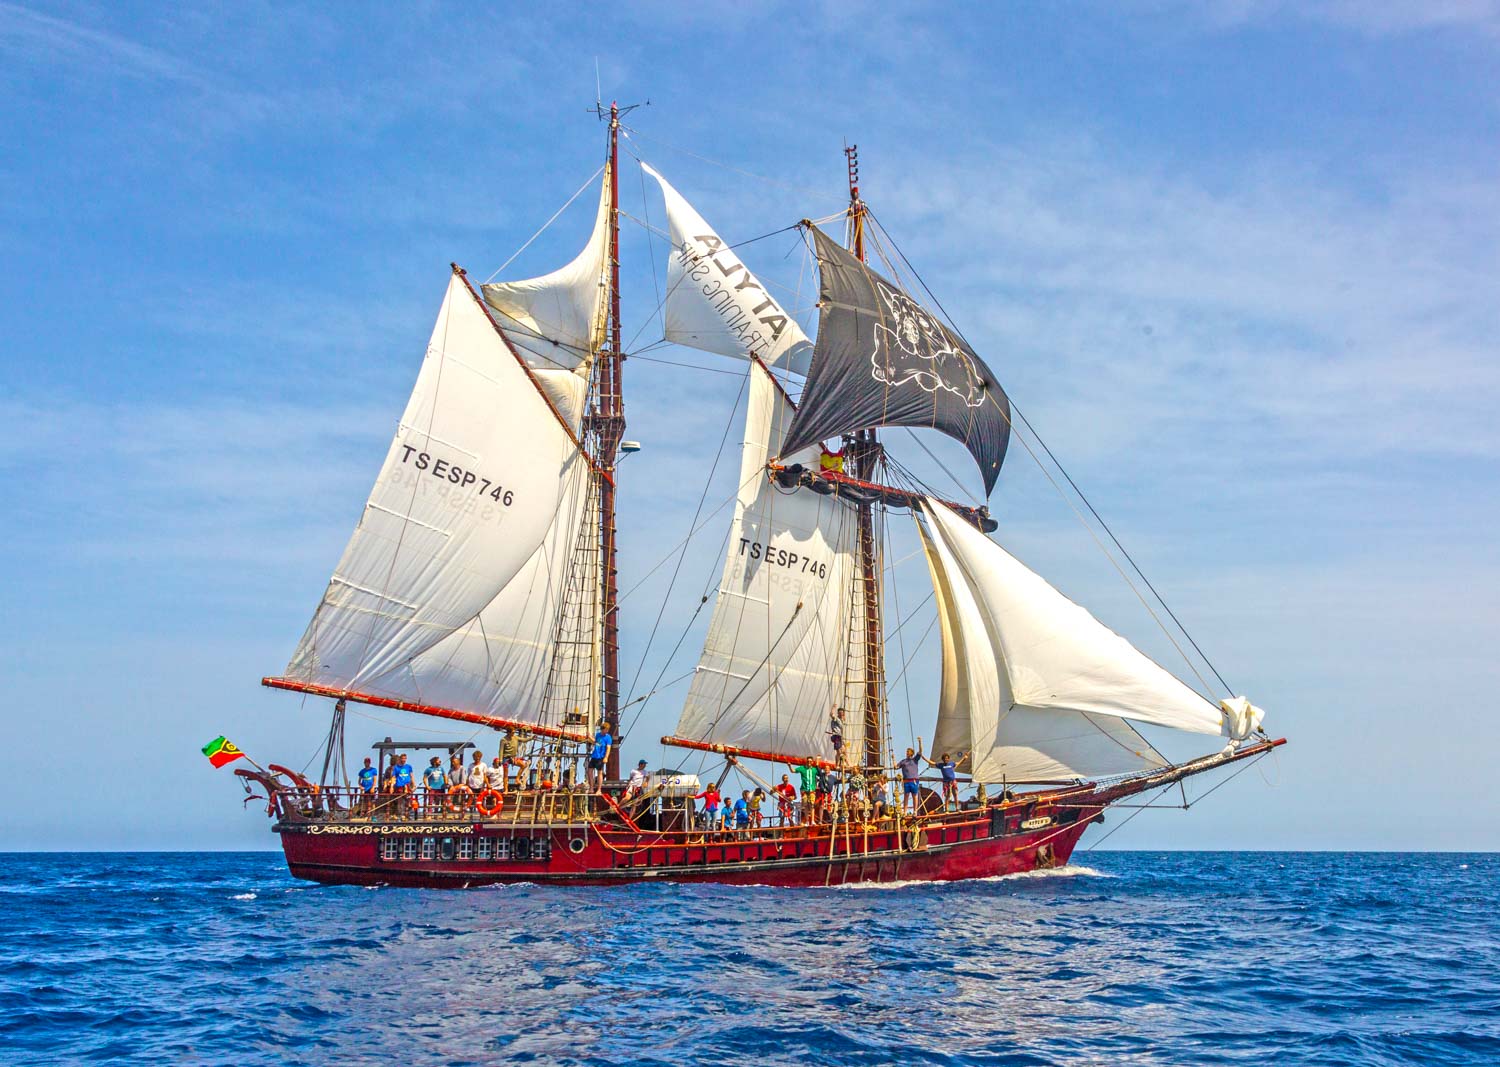 ATYLA Ship - Pictured with her New Black Sails in 2017